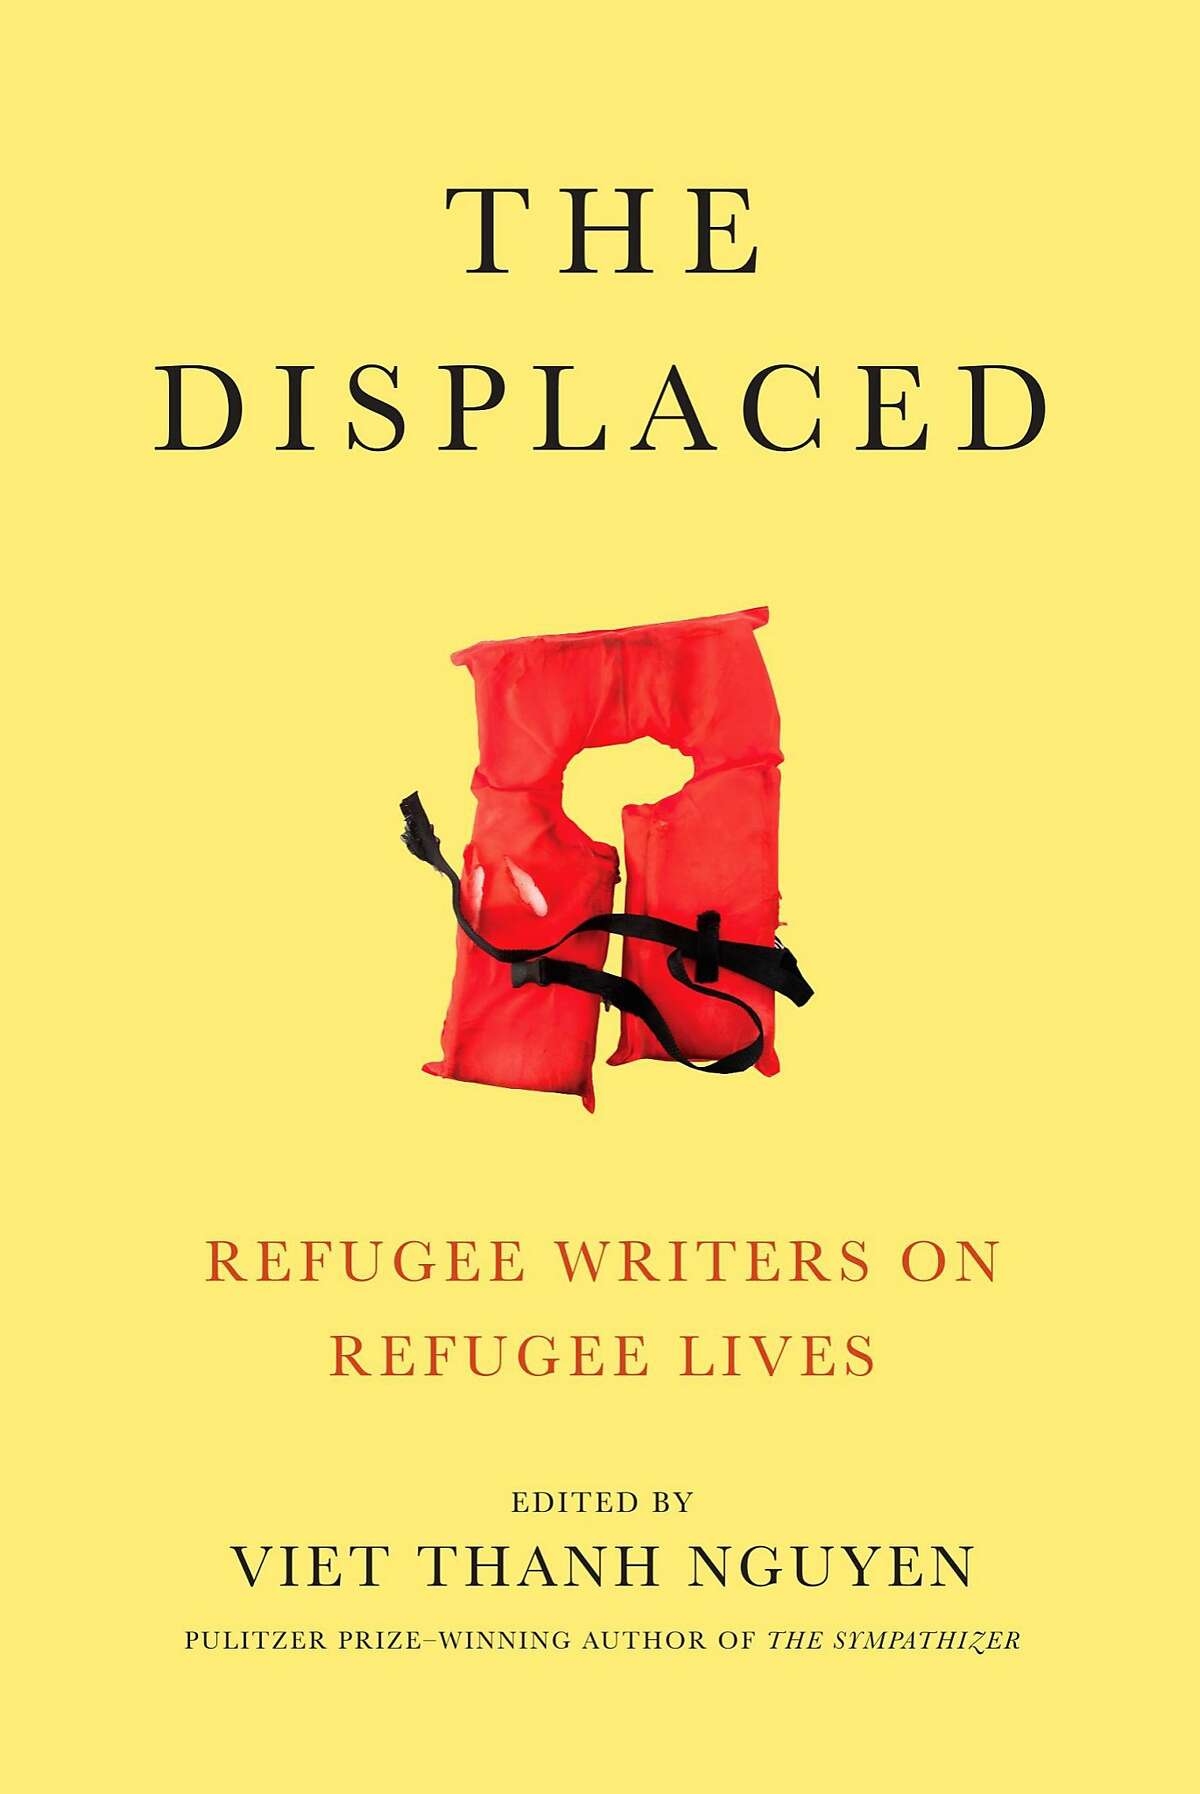 "The Displaced"